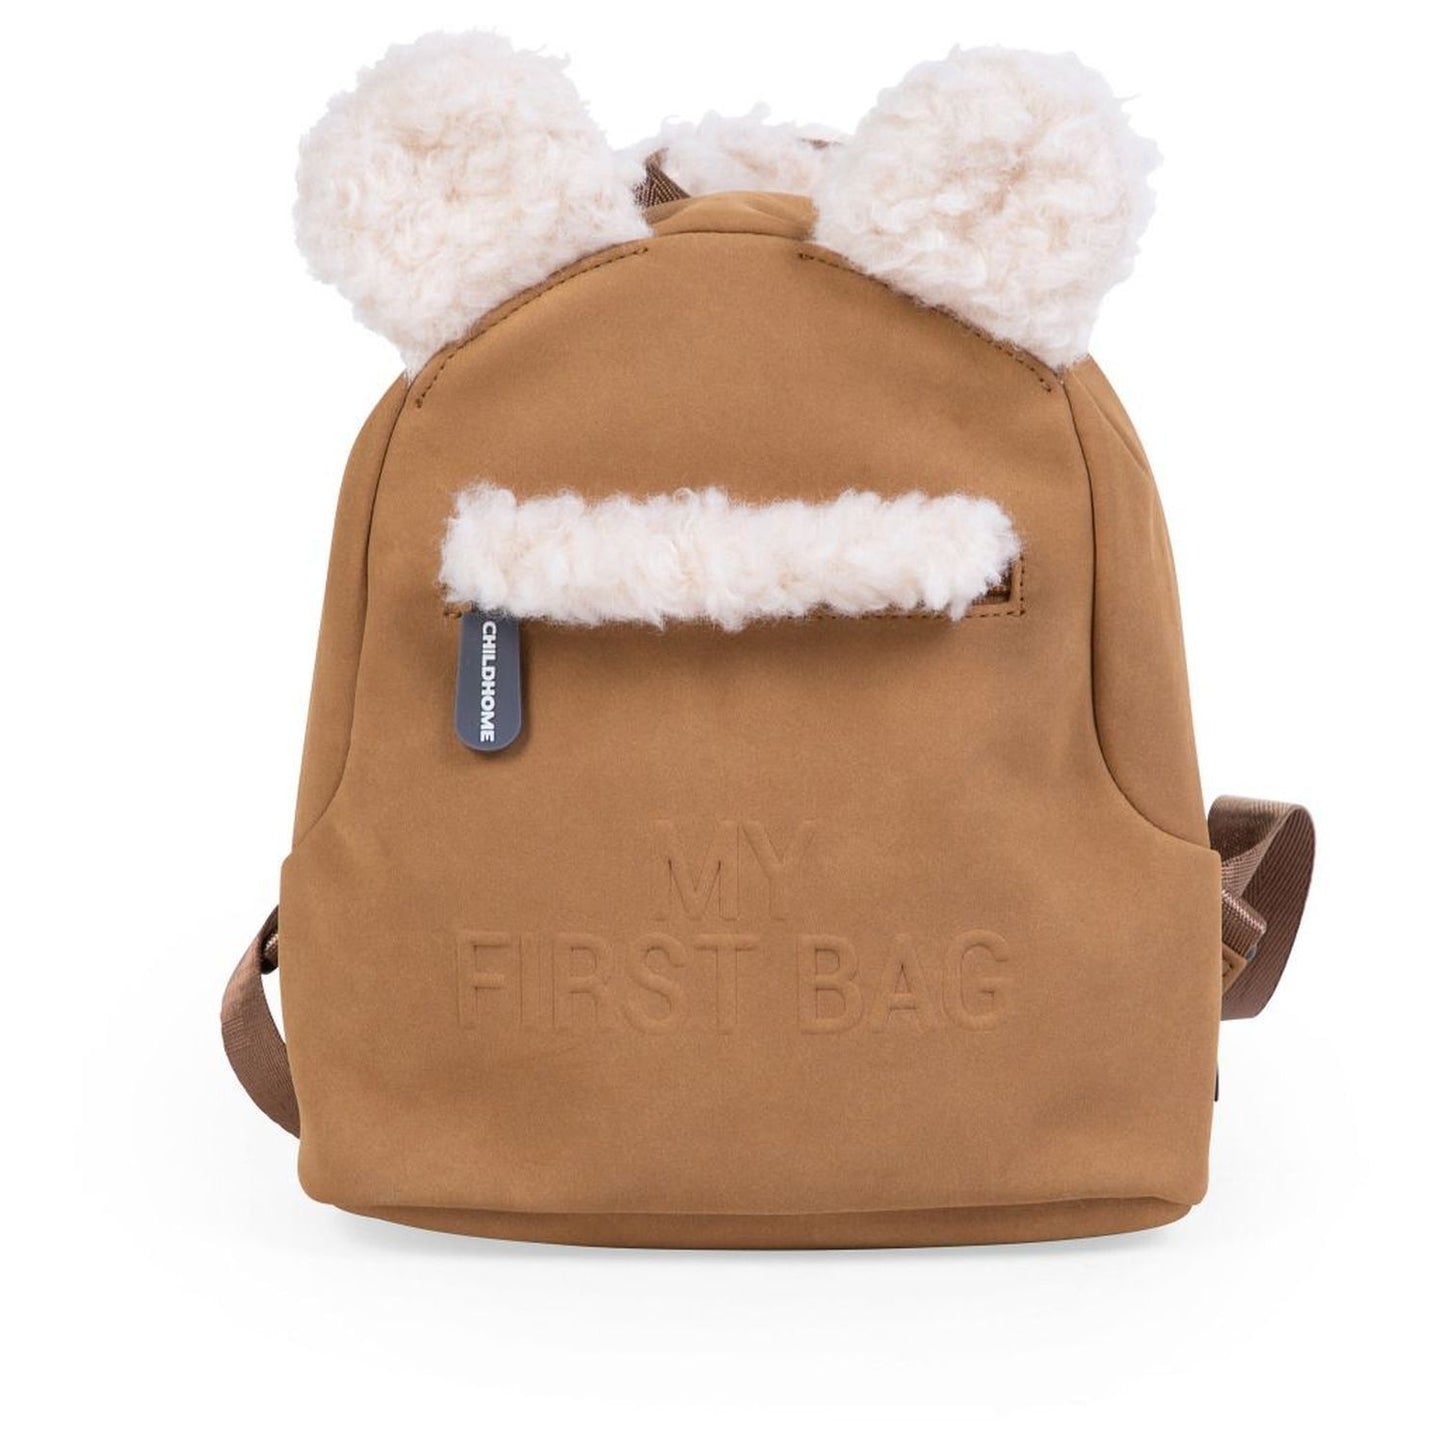 Childhome - My First Bag Sac A Dos Pour Enfants/Suede